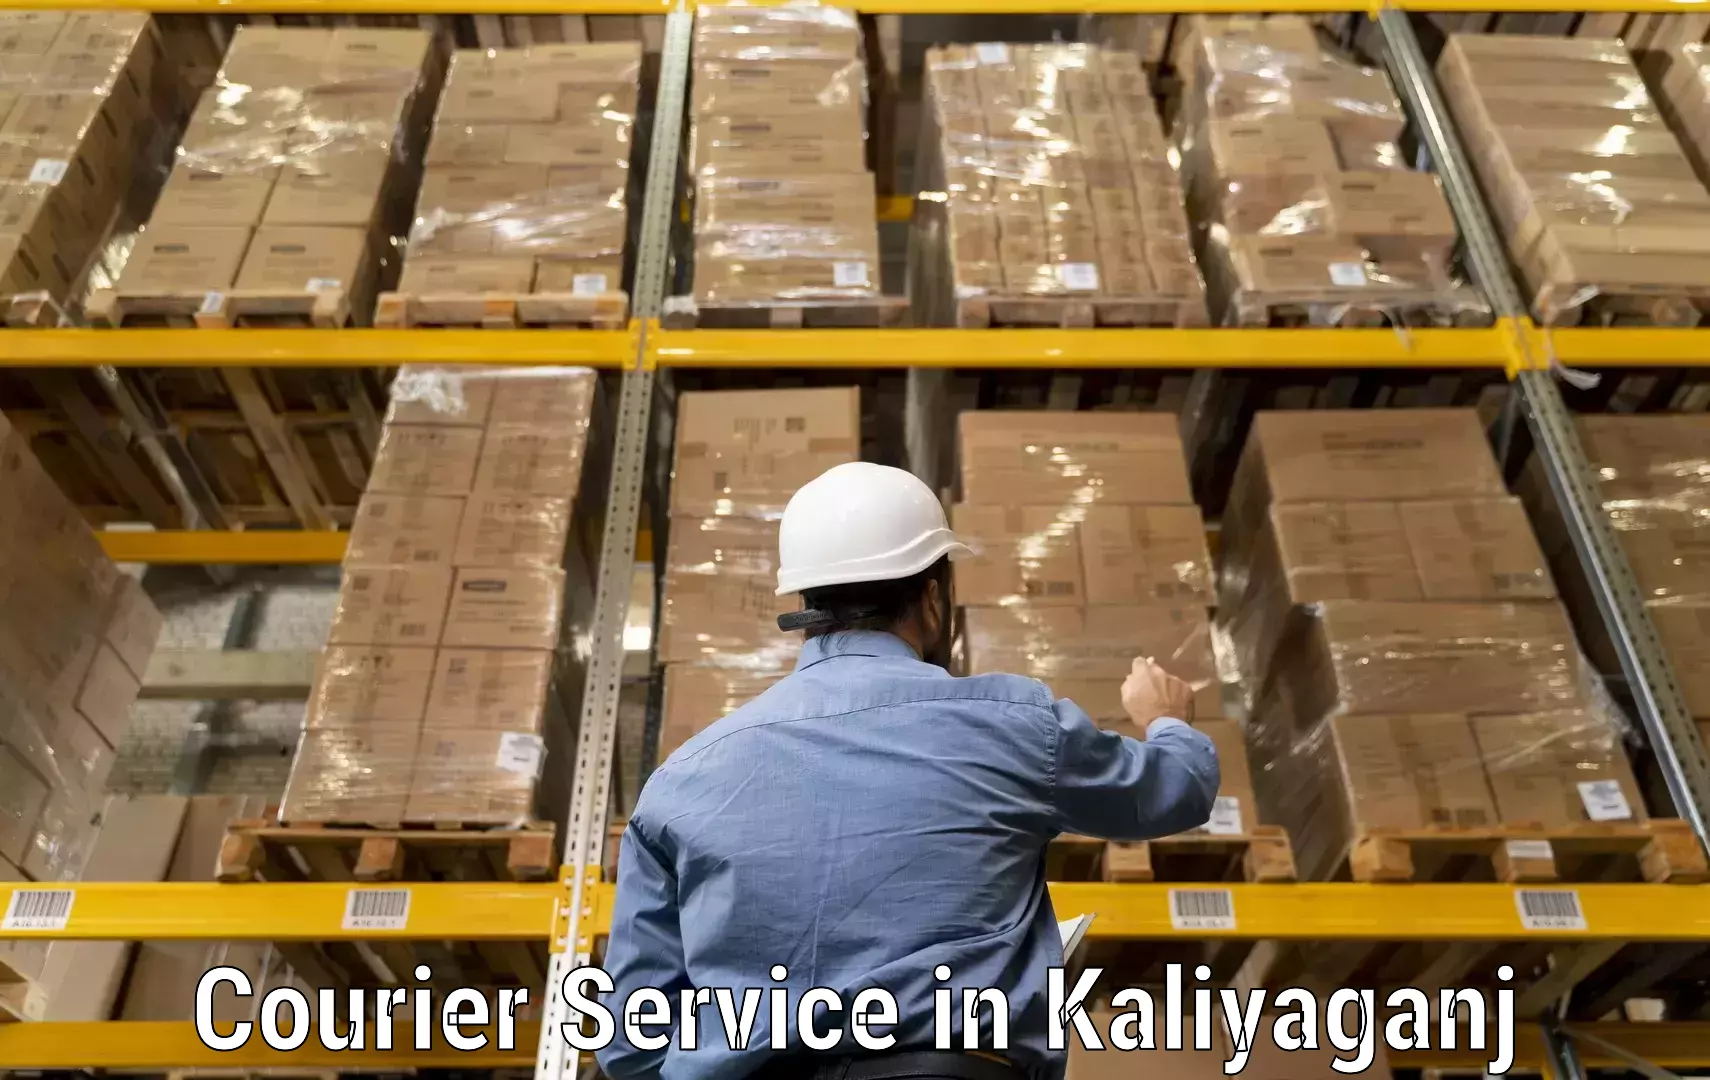 Express delivery solutions in Kaliyaganj